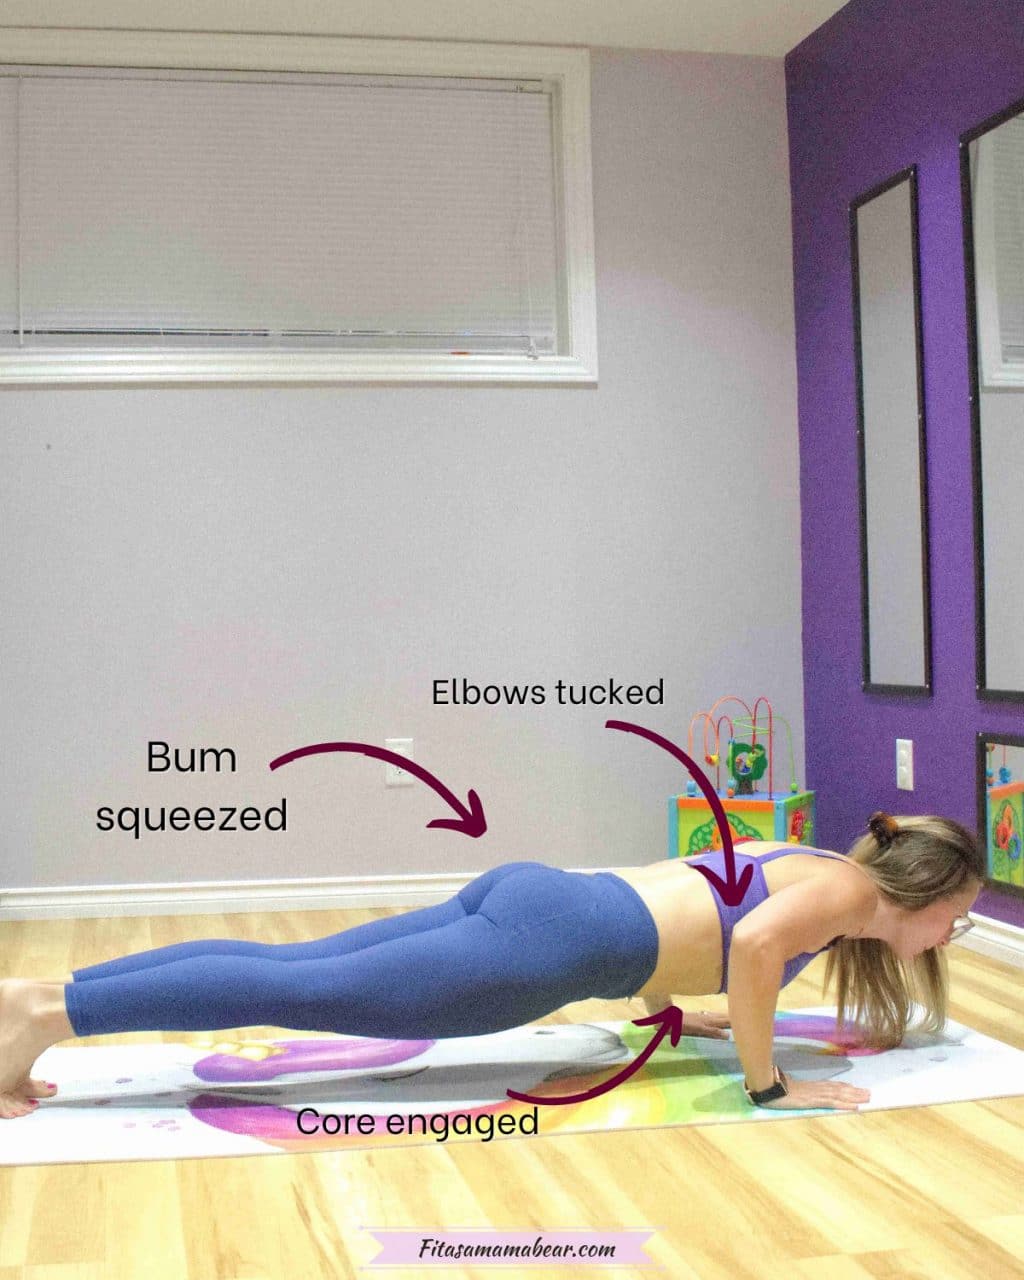 woman in blue pants and purple sports bra in a bottom push up position on a yoga mat with arrows and text about how to perform the exercise